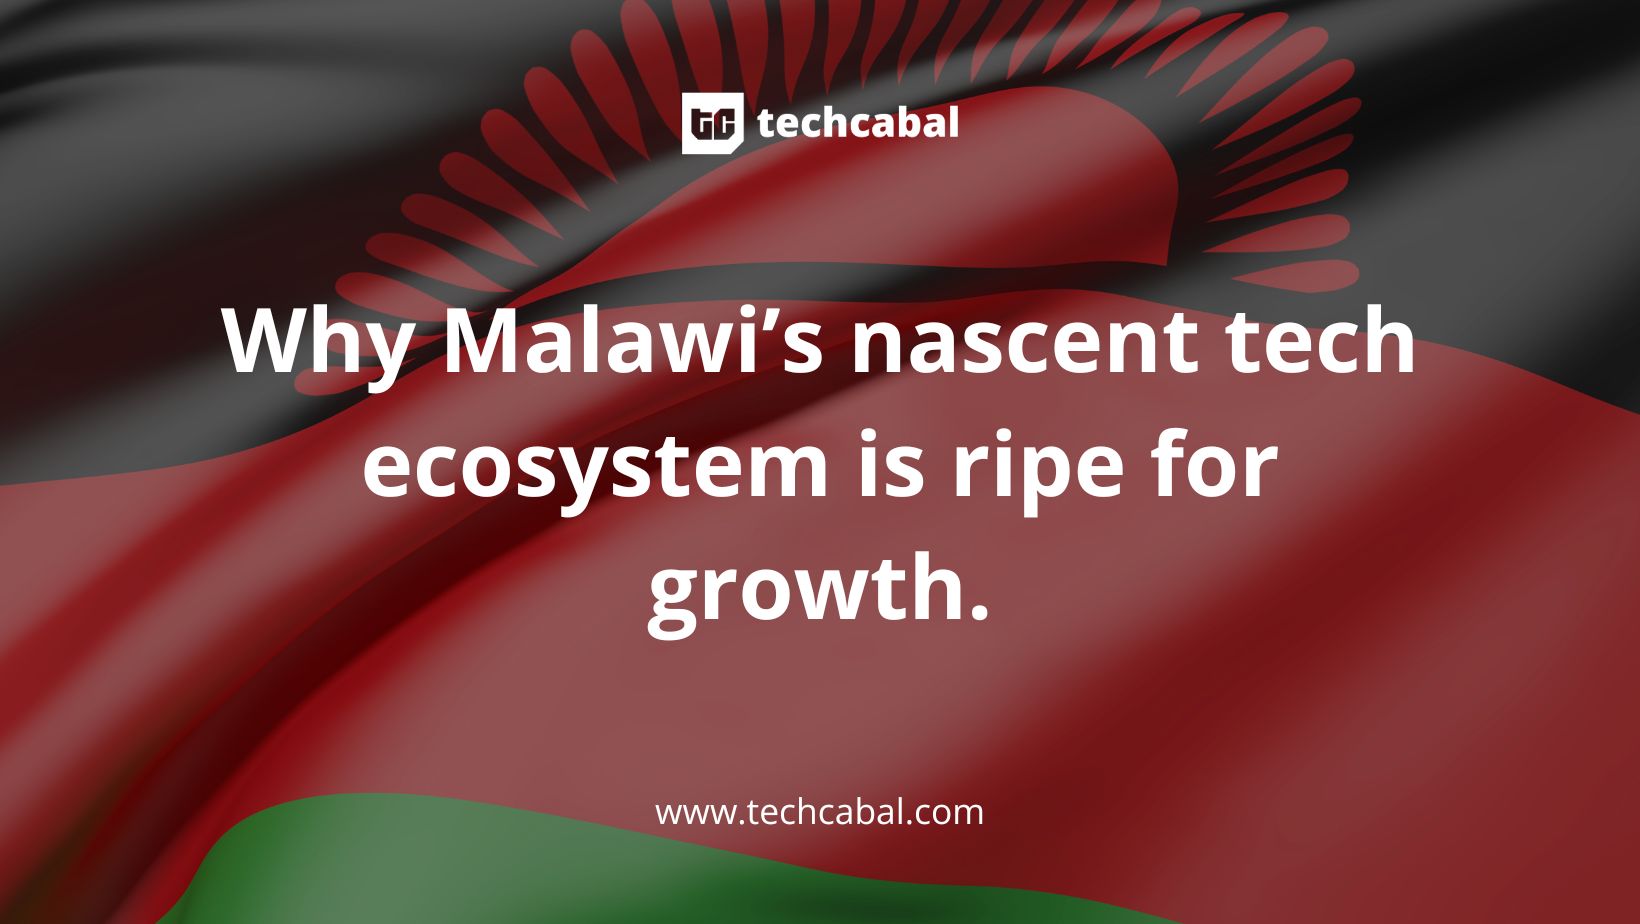 Why Malawi’s nascent tech ecosystem is ripe for growth